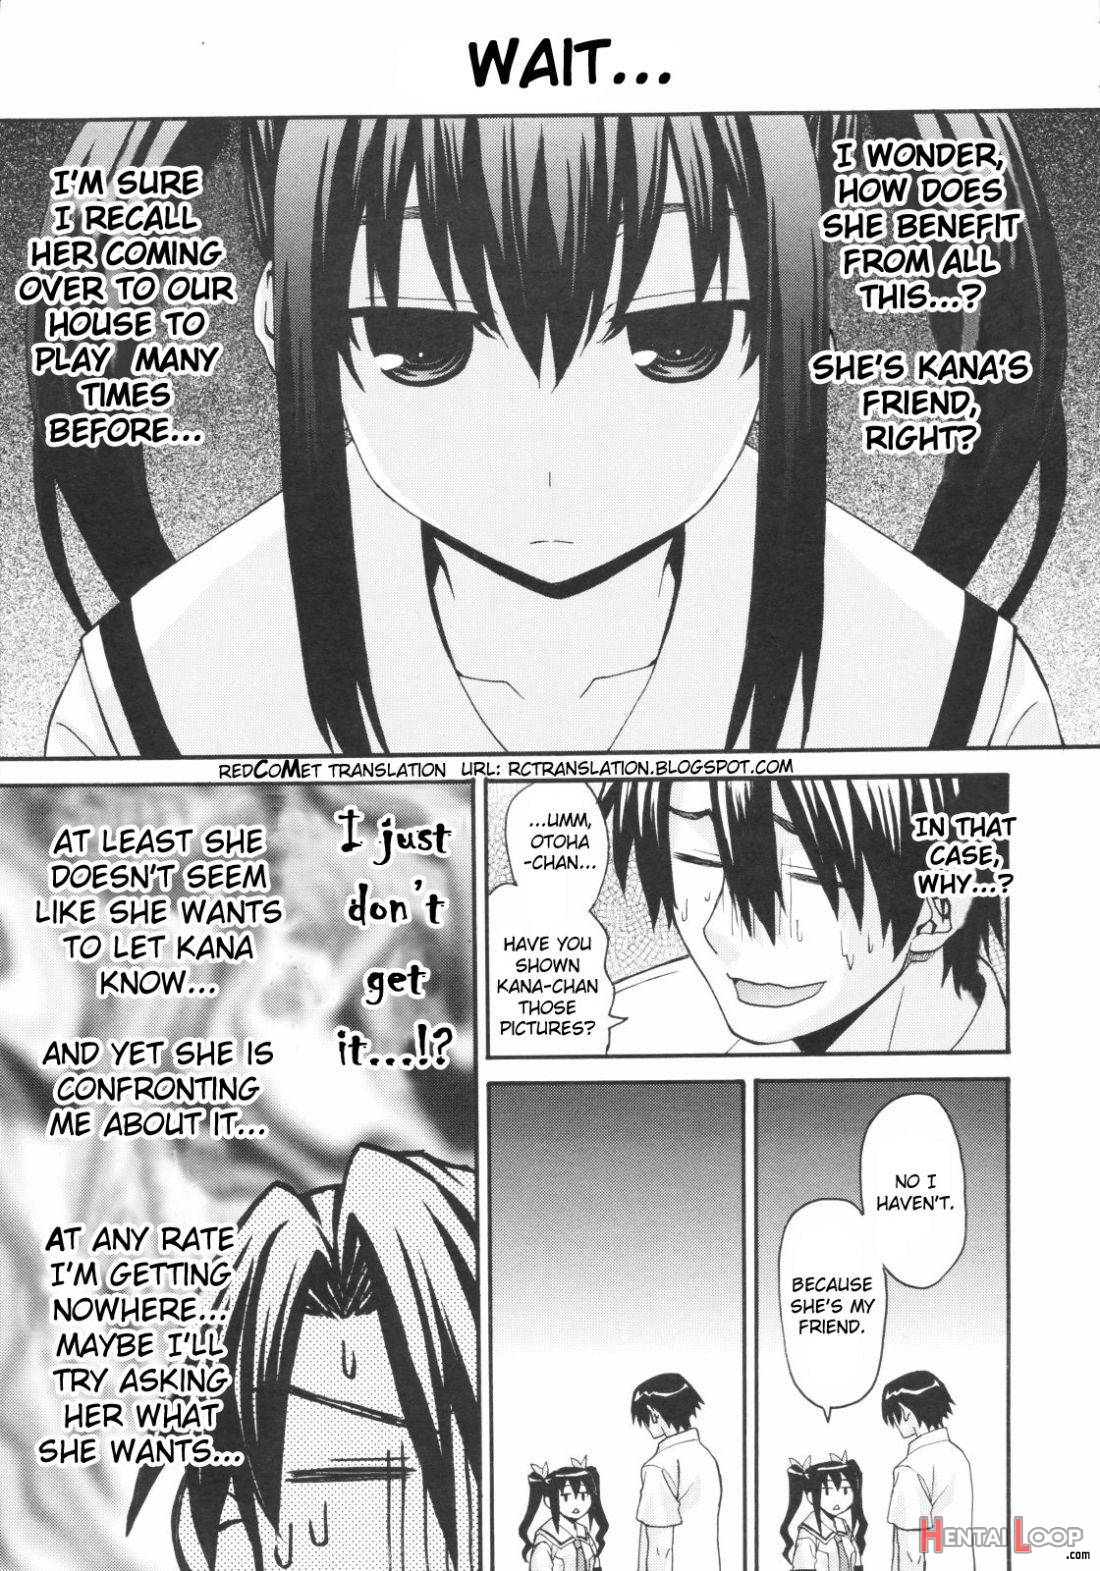 Onegai Sister+ page 7